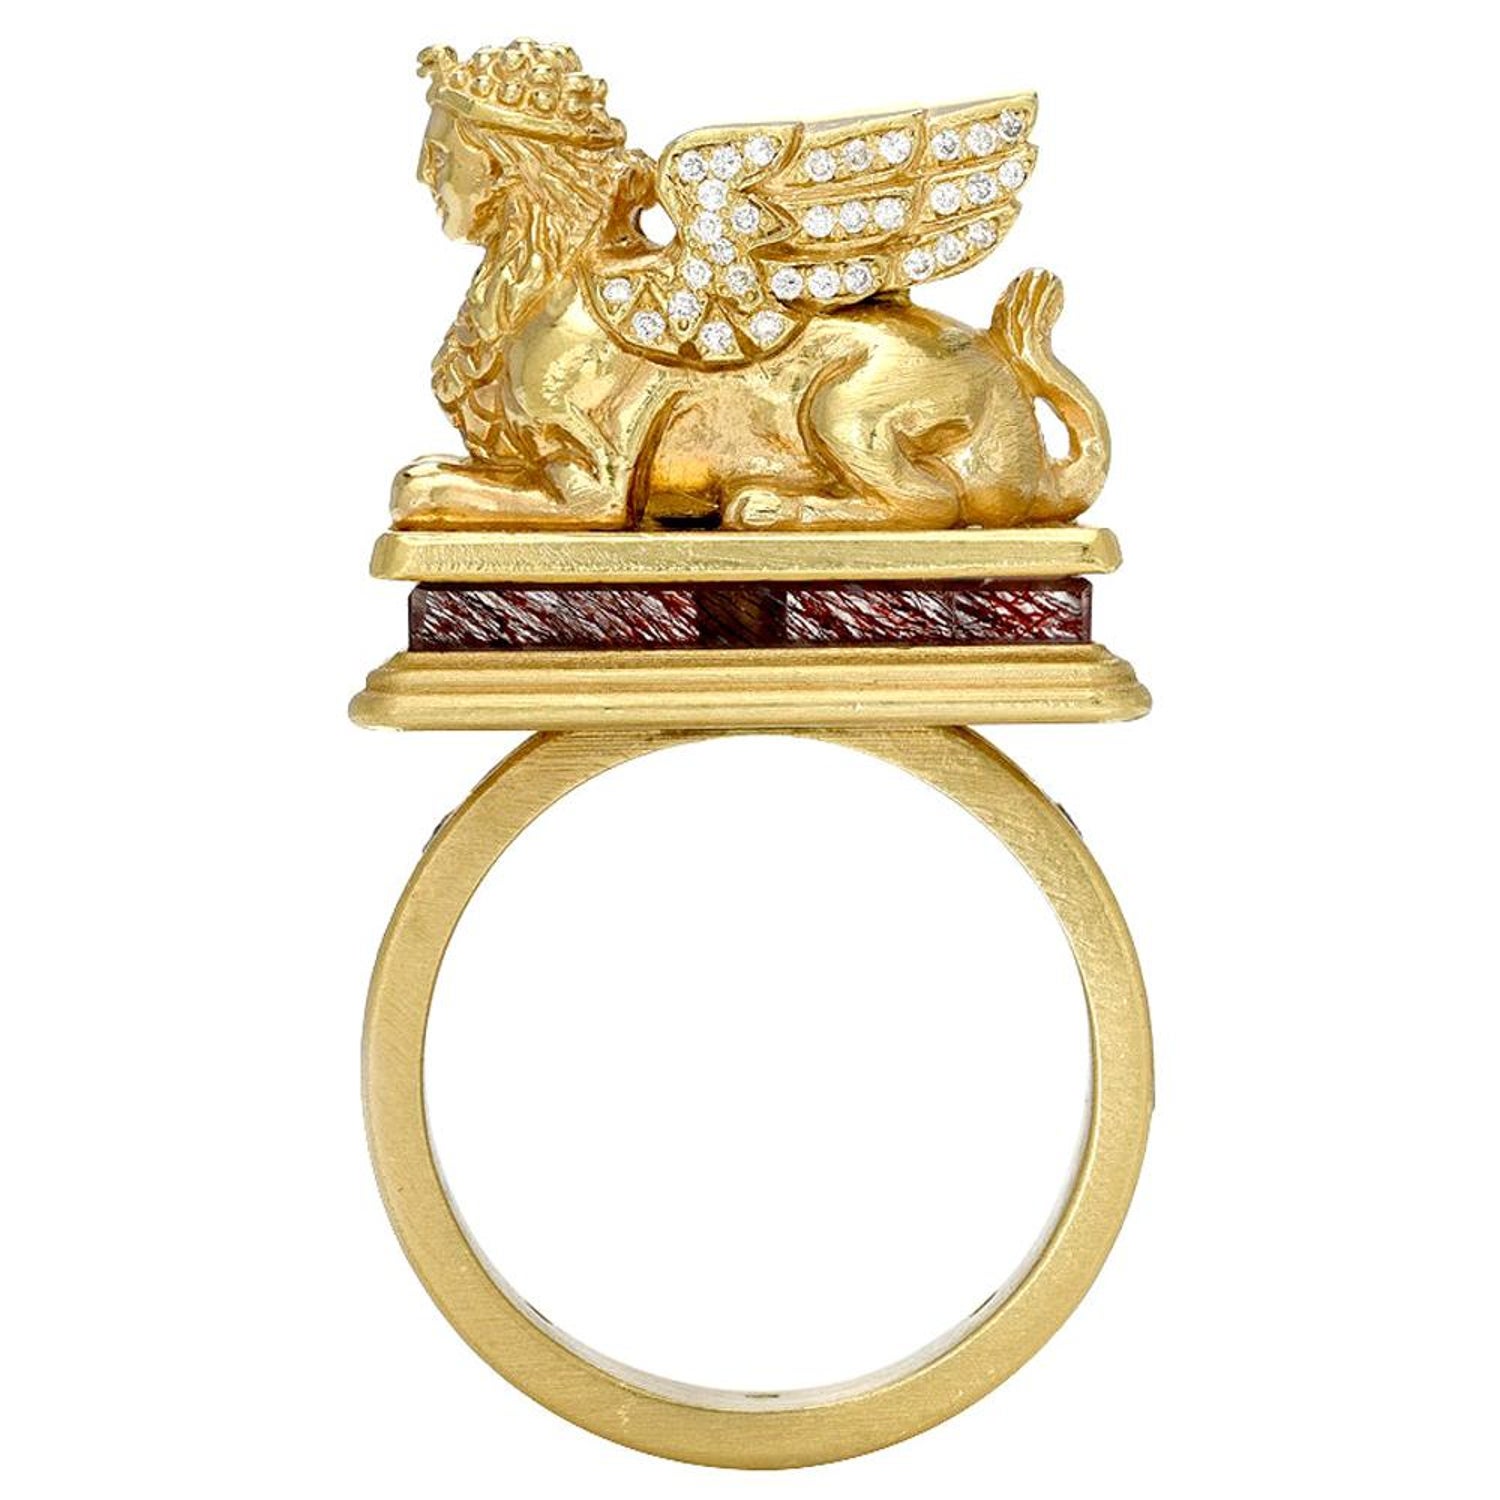 Sphinx Ring - 4 For Sale on 1stDibs